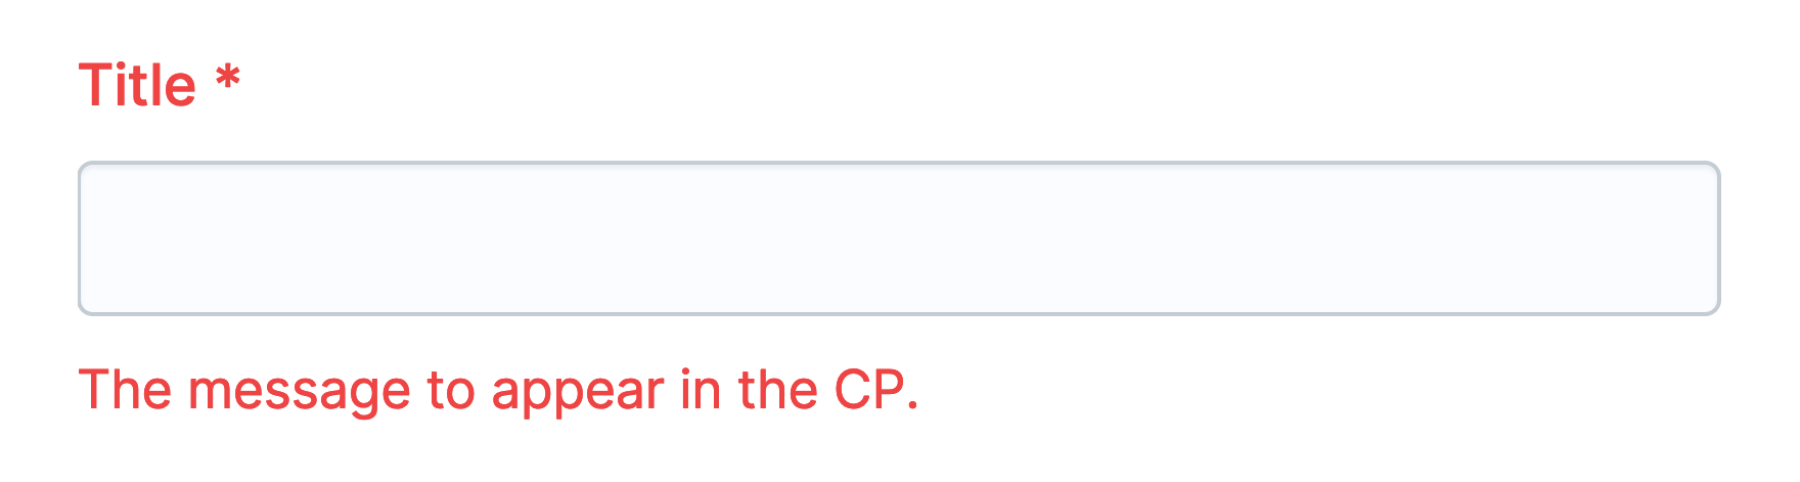 An example of the validation rule showing the $fail message within Statamic's CP for the "Title" field.